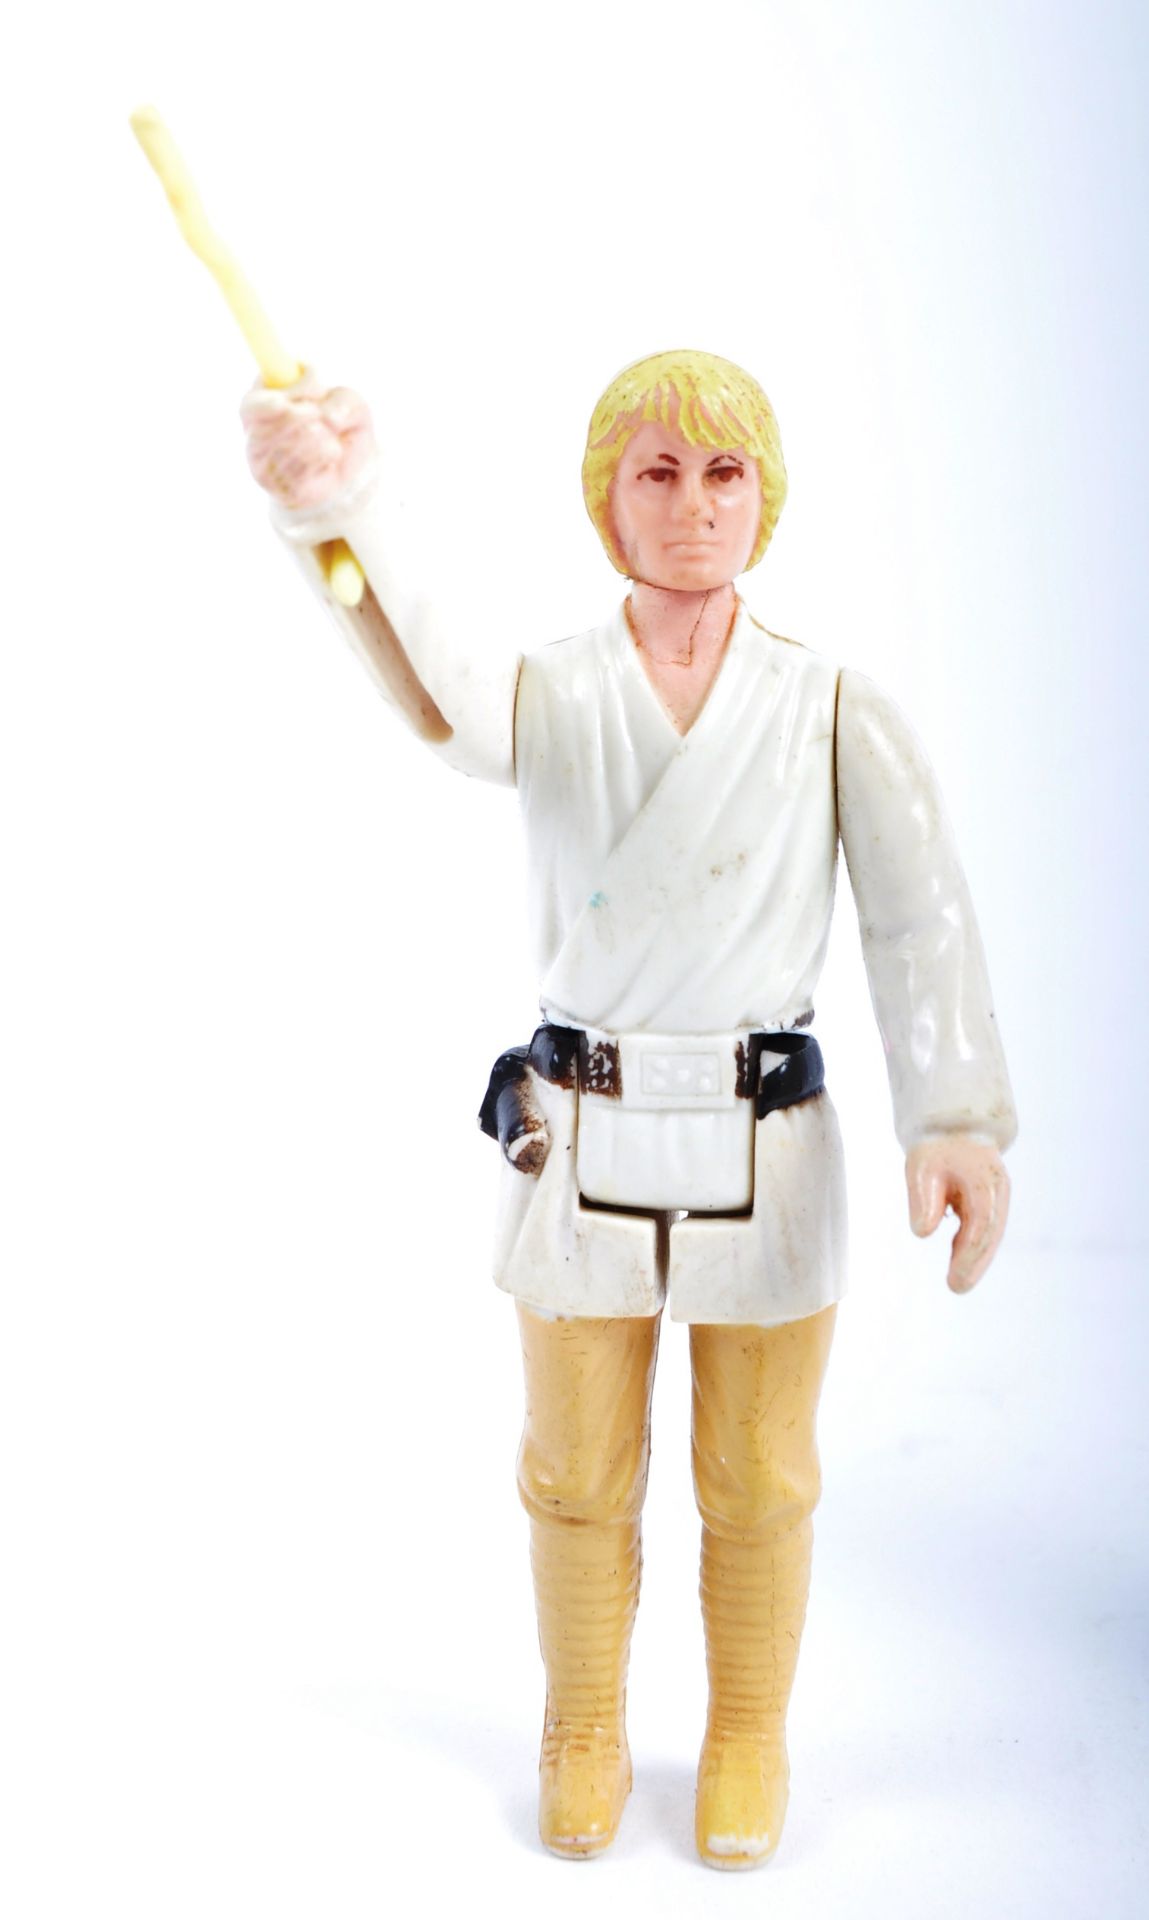 COLLECTION OF ORIGINAL MALITOY / KENNER STARWARS FIGURES - Image 4 of 6